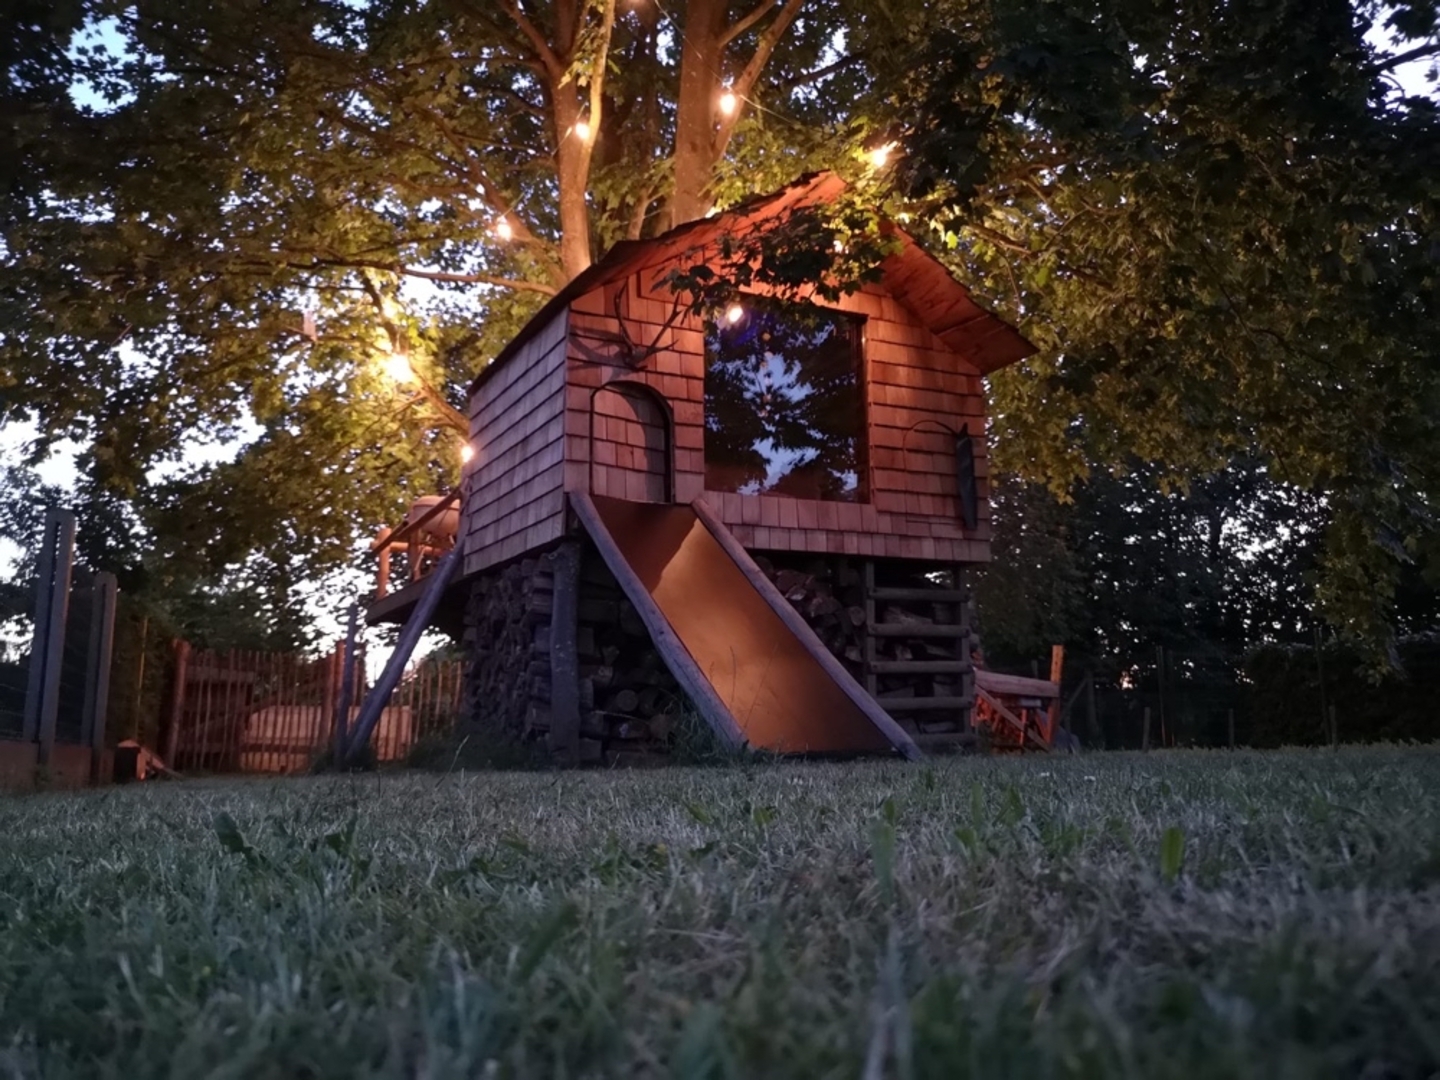 Camping in treehouse France